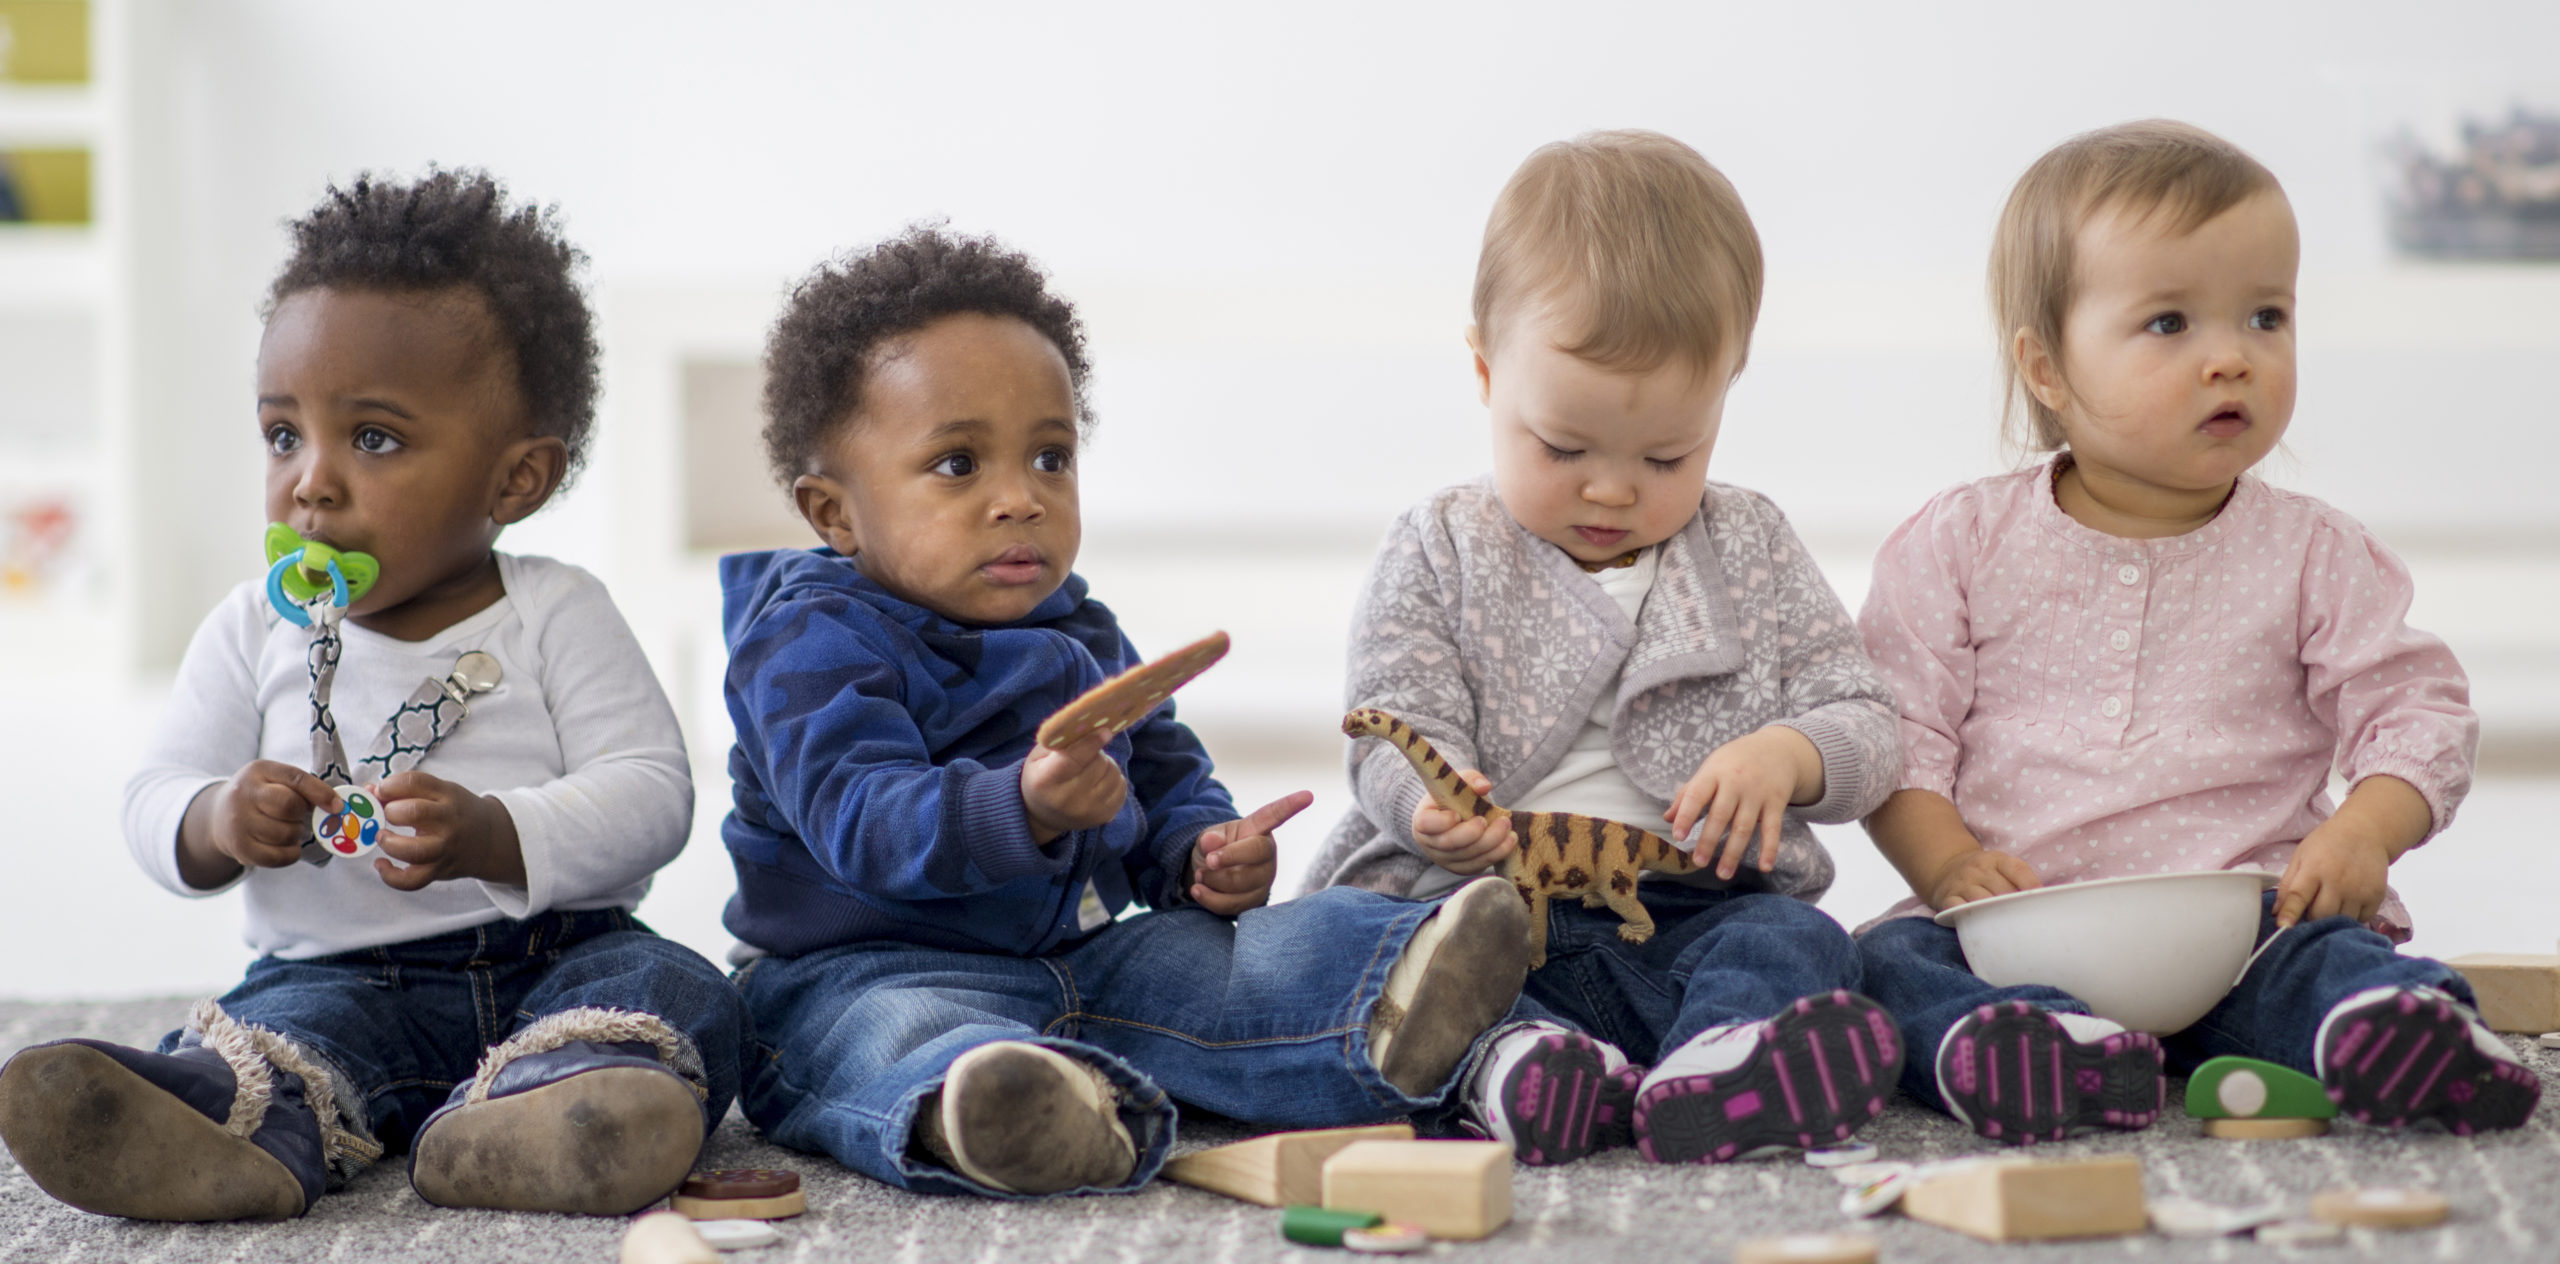 group of toddlers playing together with toys